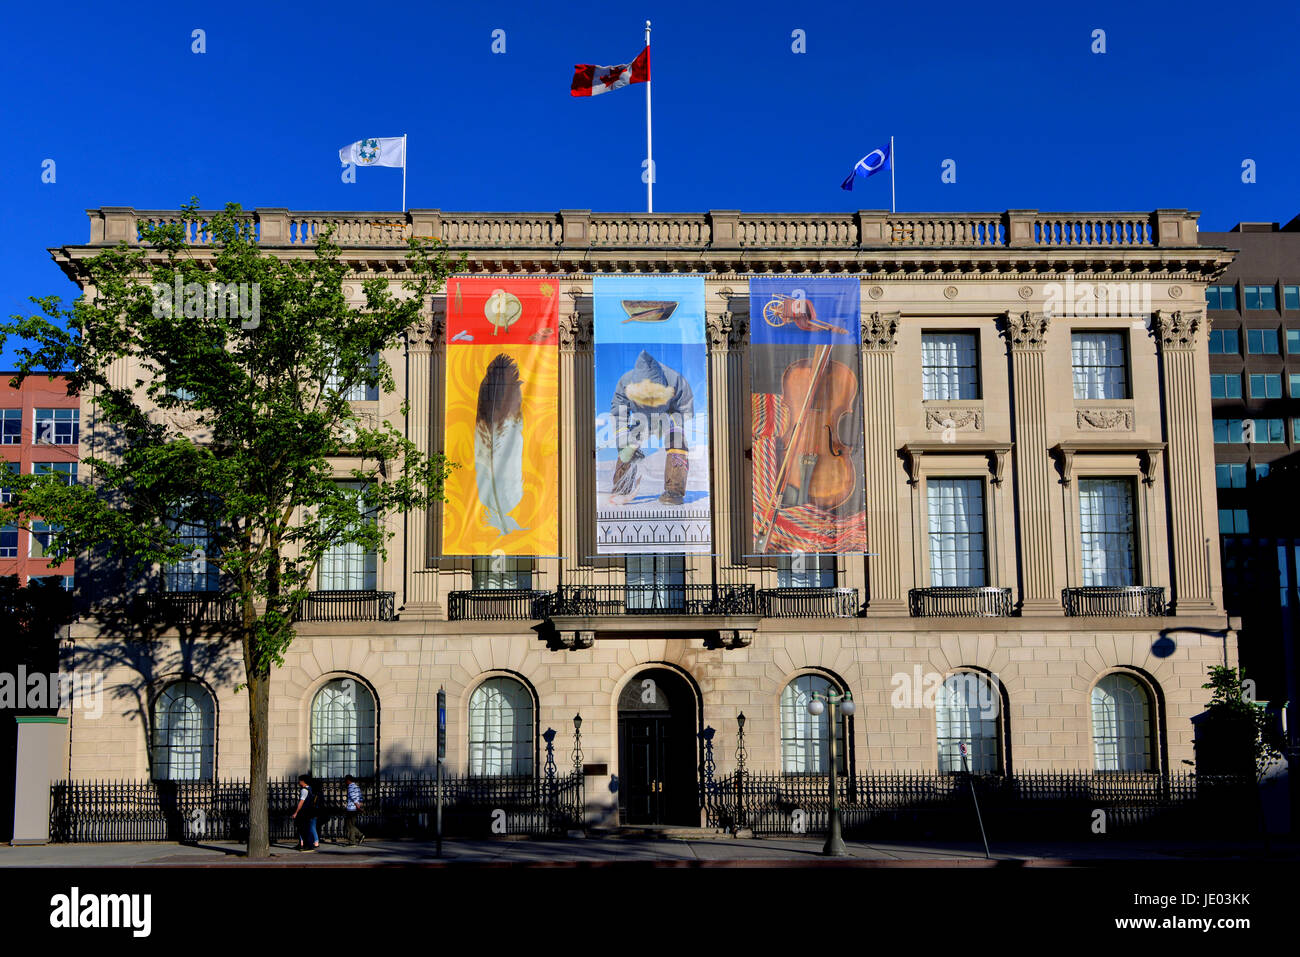 Ottawa, Canada - June 21, 2017:  Three native themed banners are added to the former US embassy, across from Parliament Hill, during a ceremony on National Indigenous Peoples Day, formerly known as National Aboriginal Day.  It was recently announced the building will be converted to a centre dedicated to Indigenous people. Credit: Paul McKinnon/Alamy Live News Stock Photo